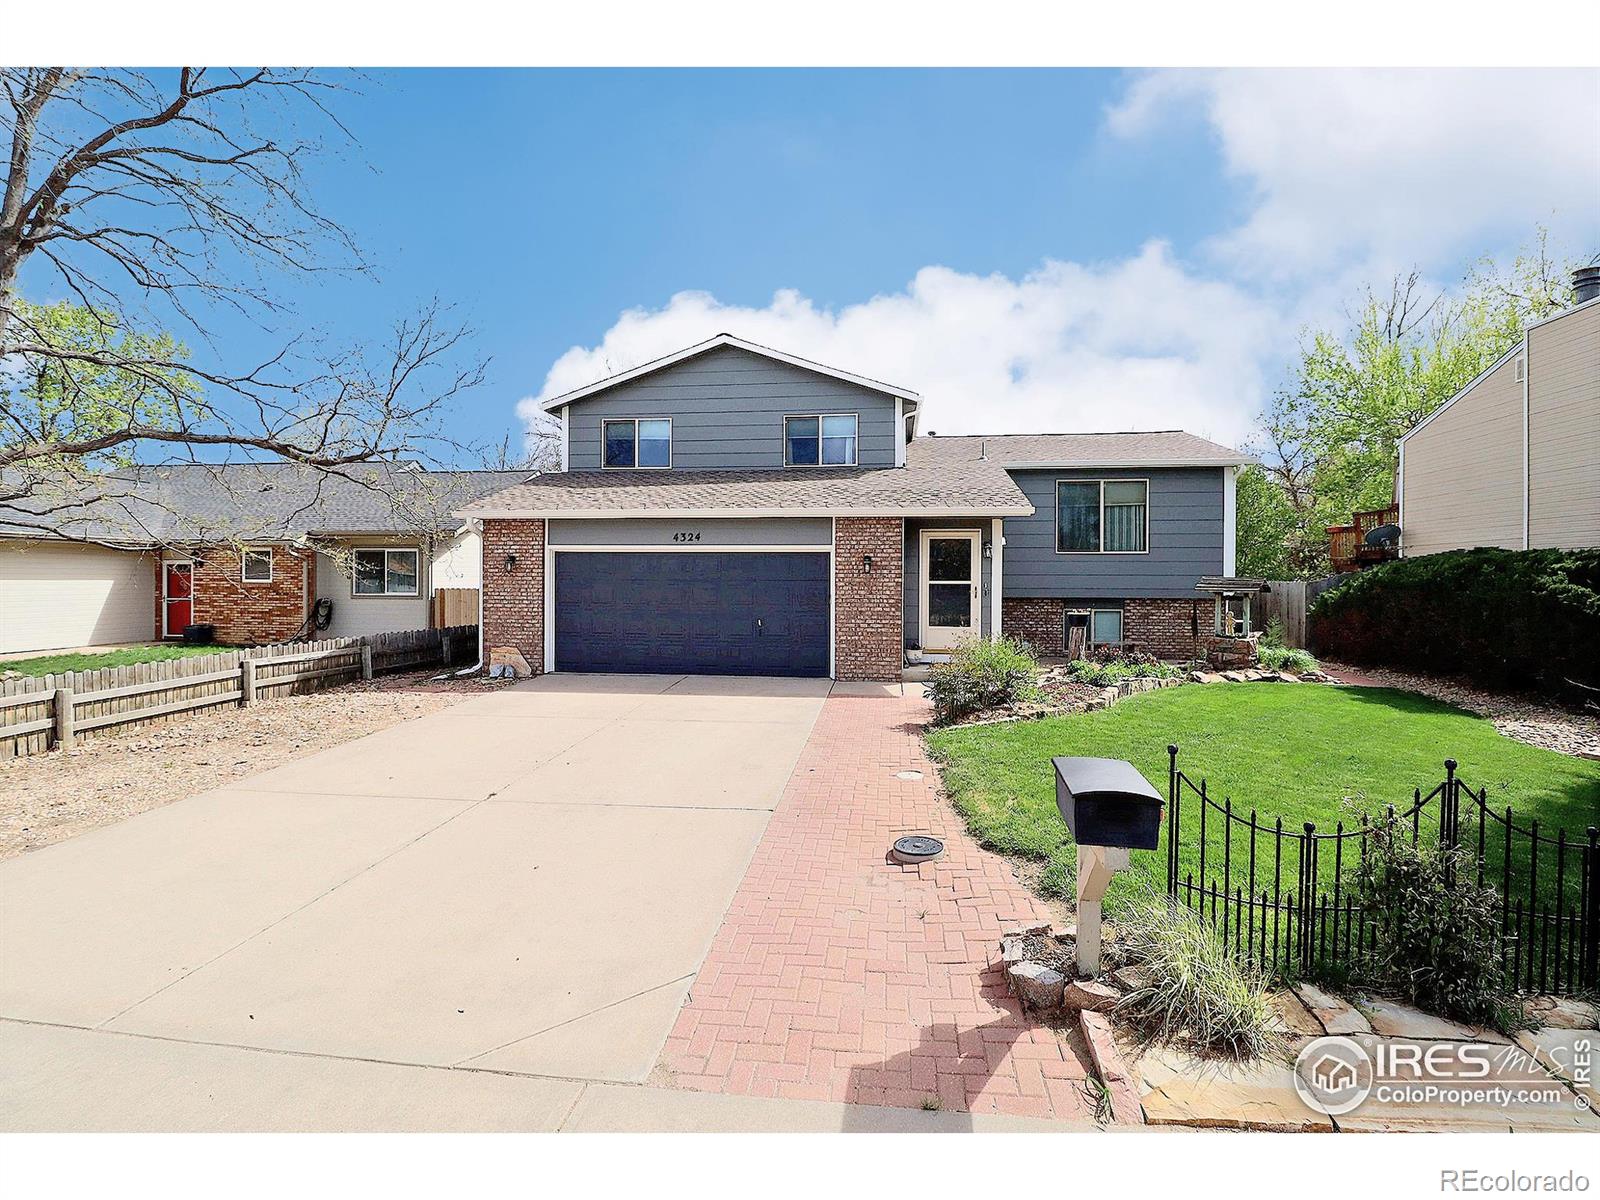 Report Image for 4324  23rd Street,Greeley, Colorado